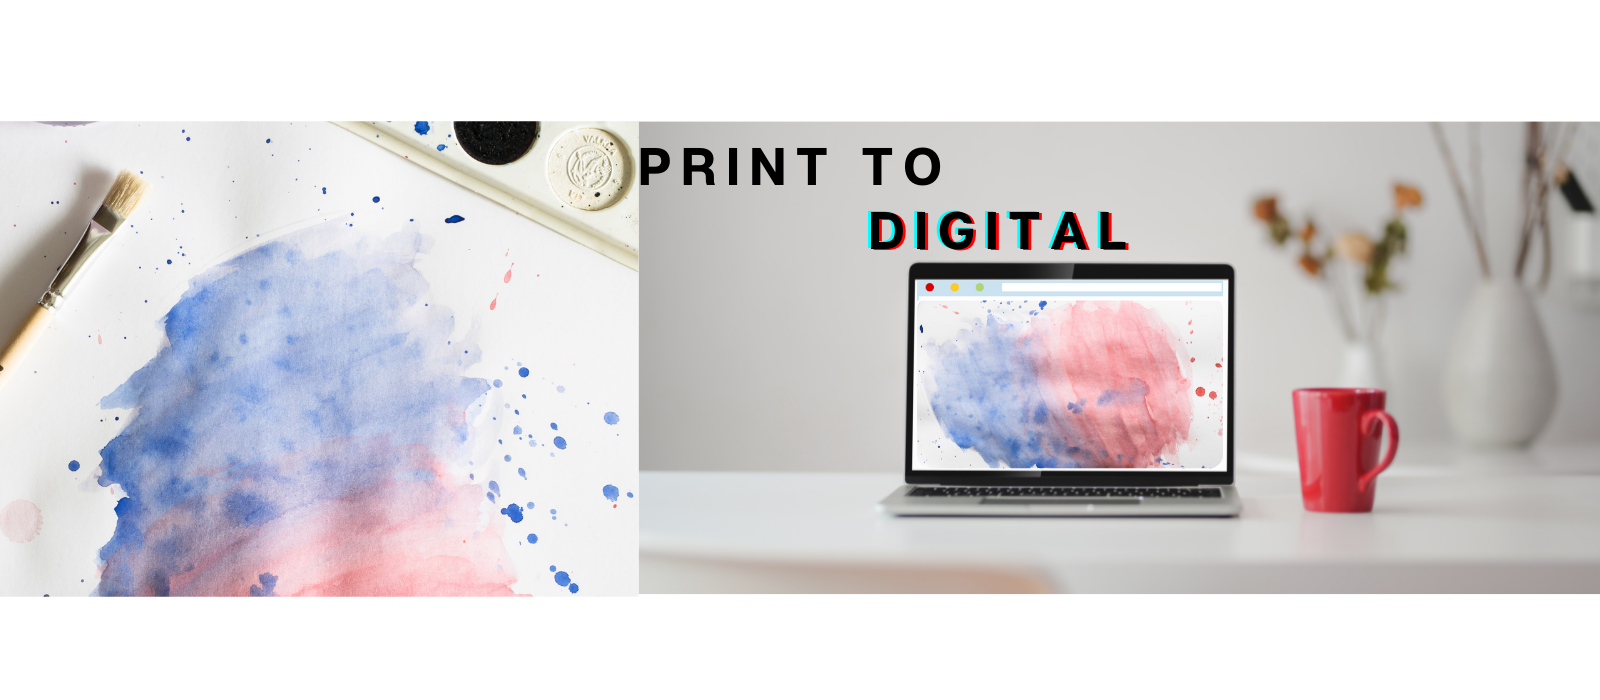 How to Bring Your Print Designs to Digital Form?